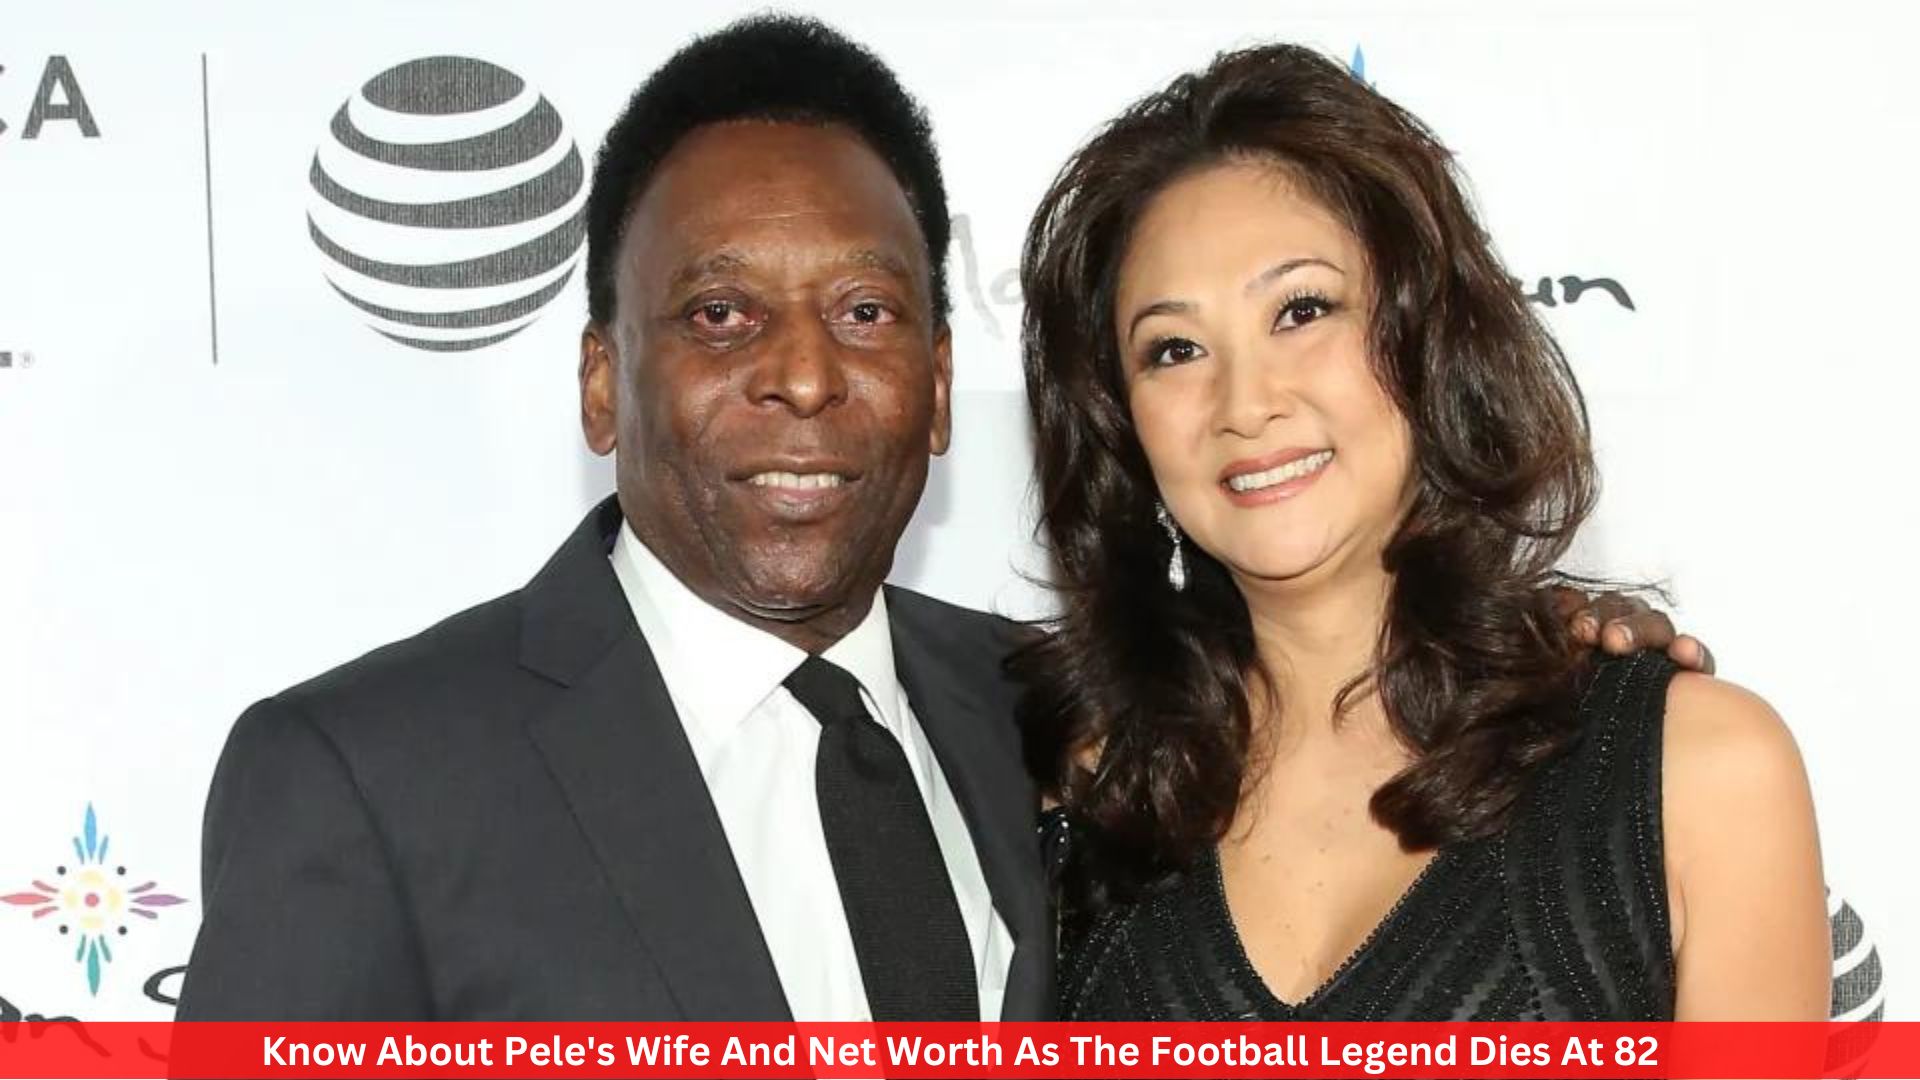 Know About Pele's Wife And Net Worth As The Football Legend Dies At 82